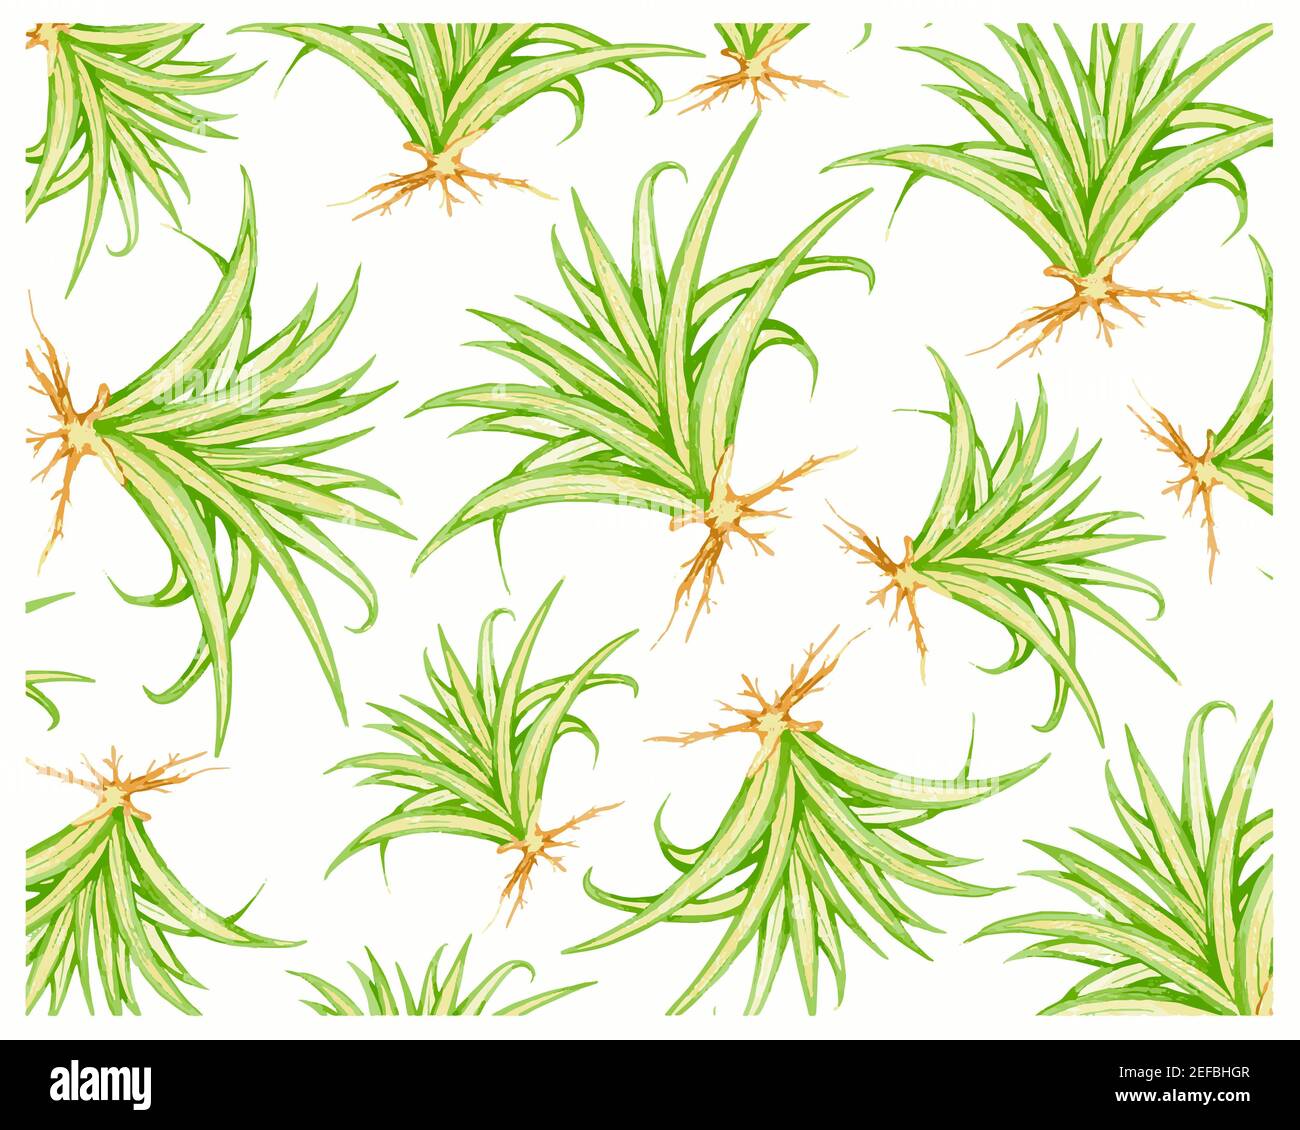 Illustration Background of Pandanus Veitchii Plants or Stripes Screw Pine Decoration in The Beautiful Garden. A Agave Plants with Thick and Fleshy Lea Stock Photo